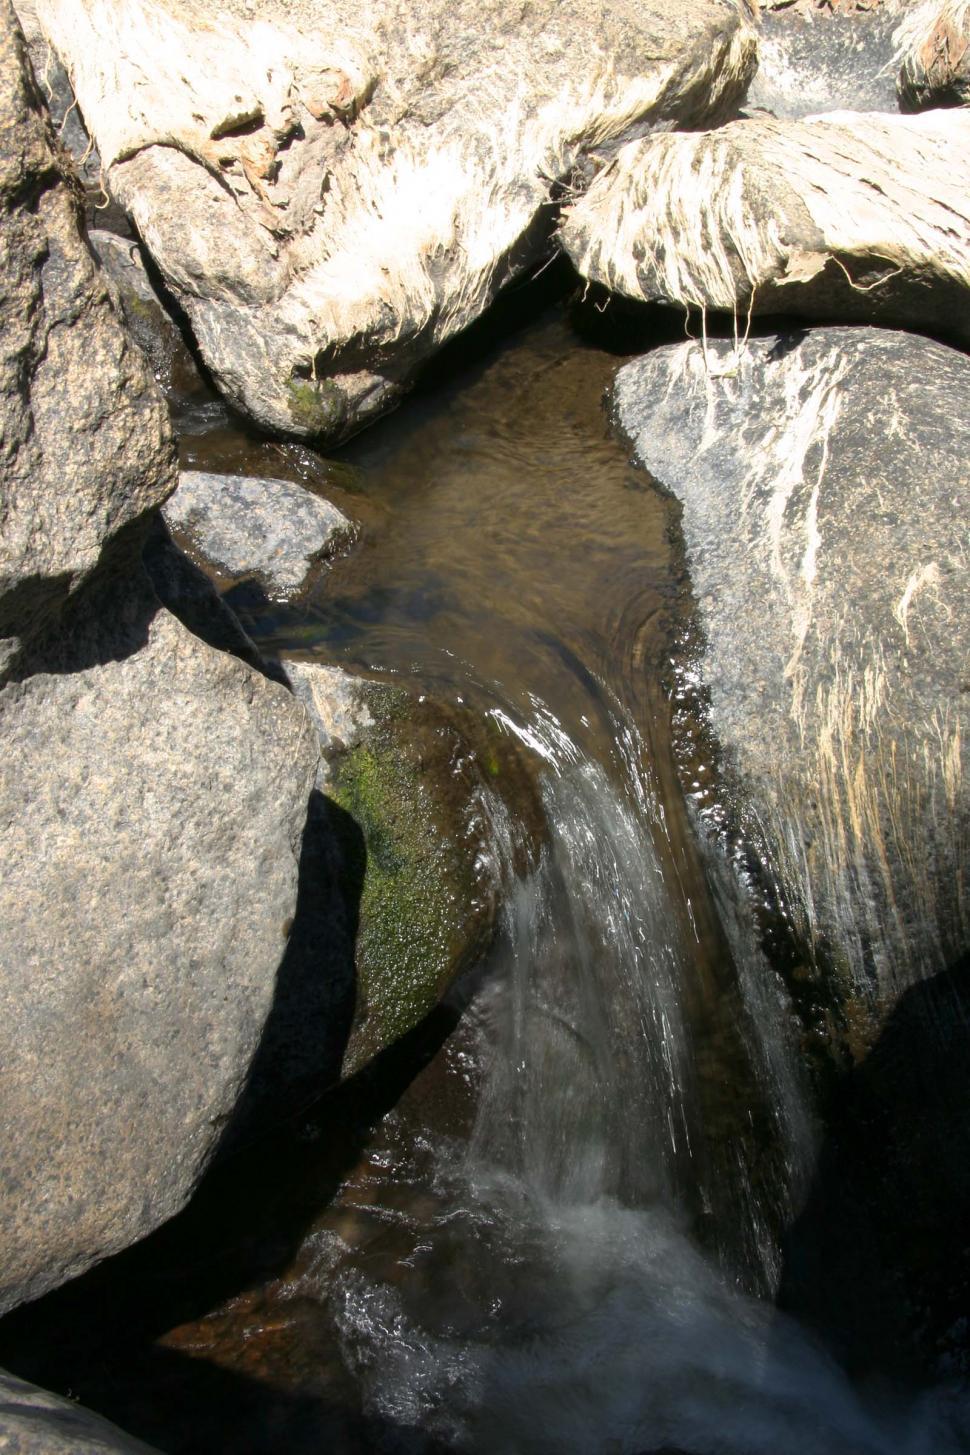 Free Image of Close Up of Rocks With Stream Between Them 